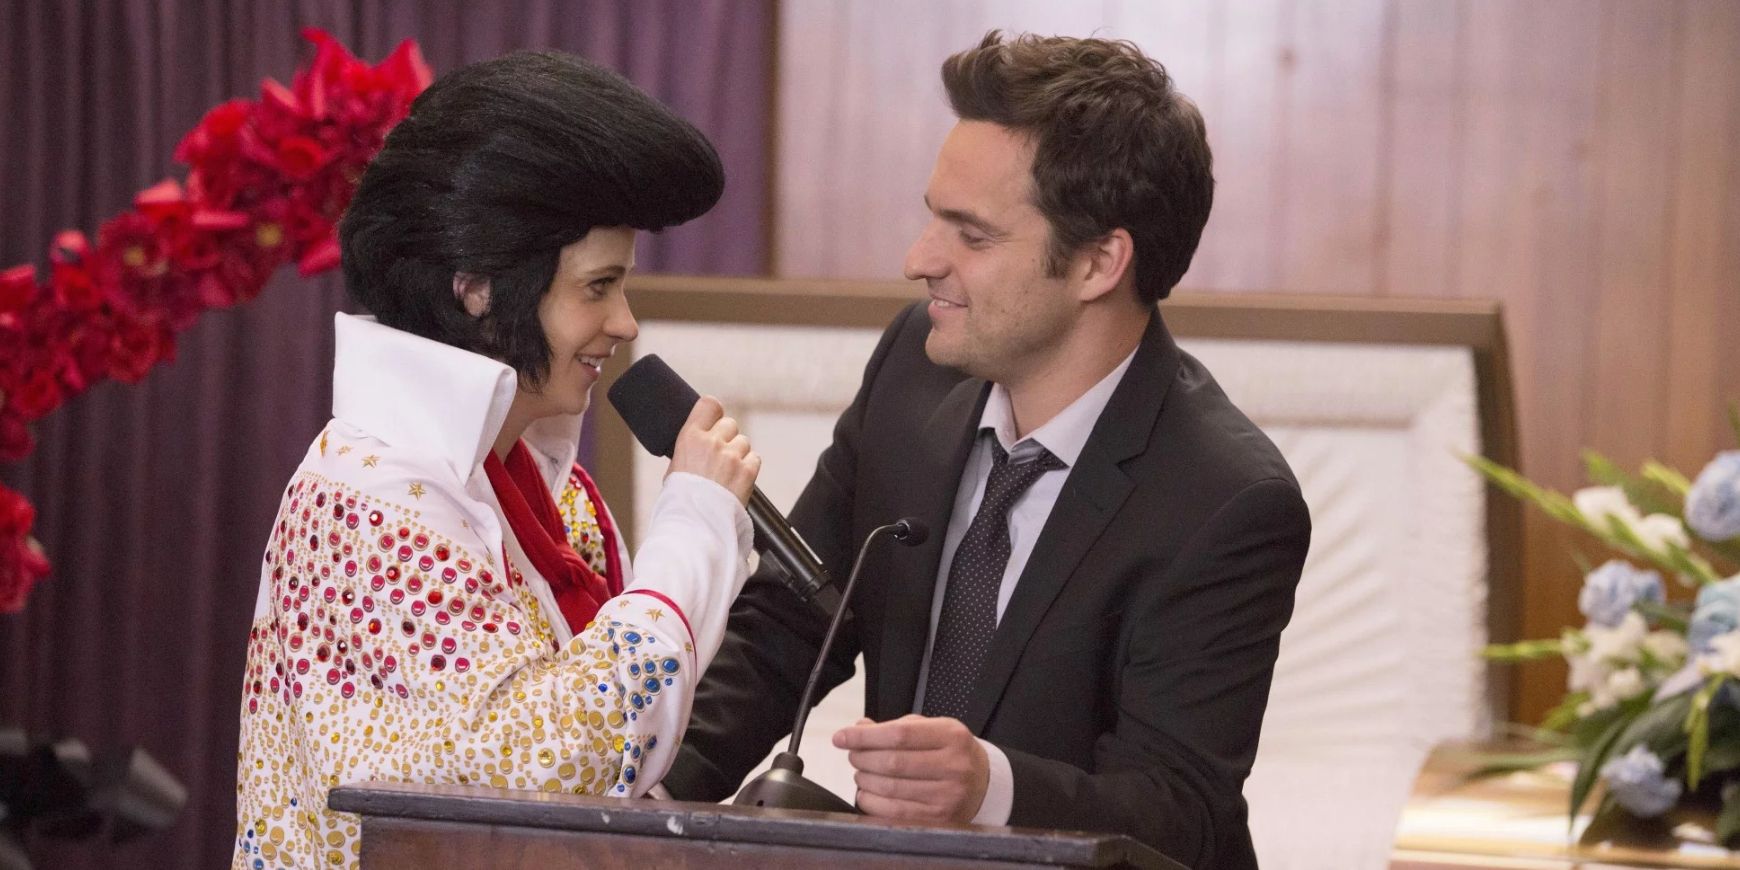 Jess sings as Elvis while Nick stands at the podium for his father's funeral service in the New Girl episode Chicago